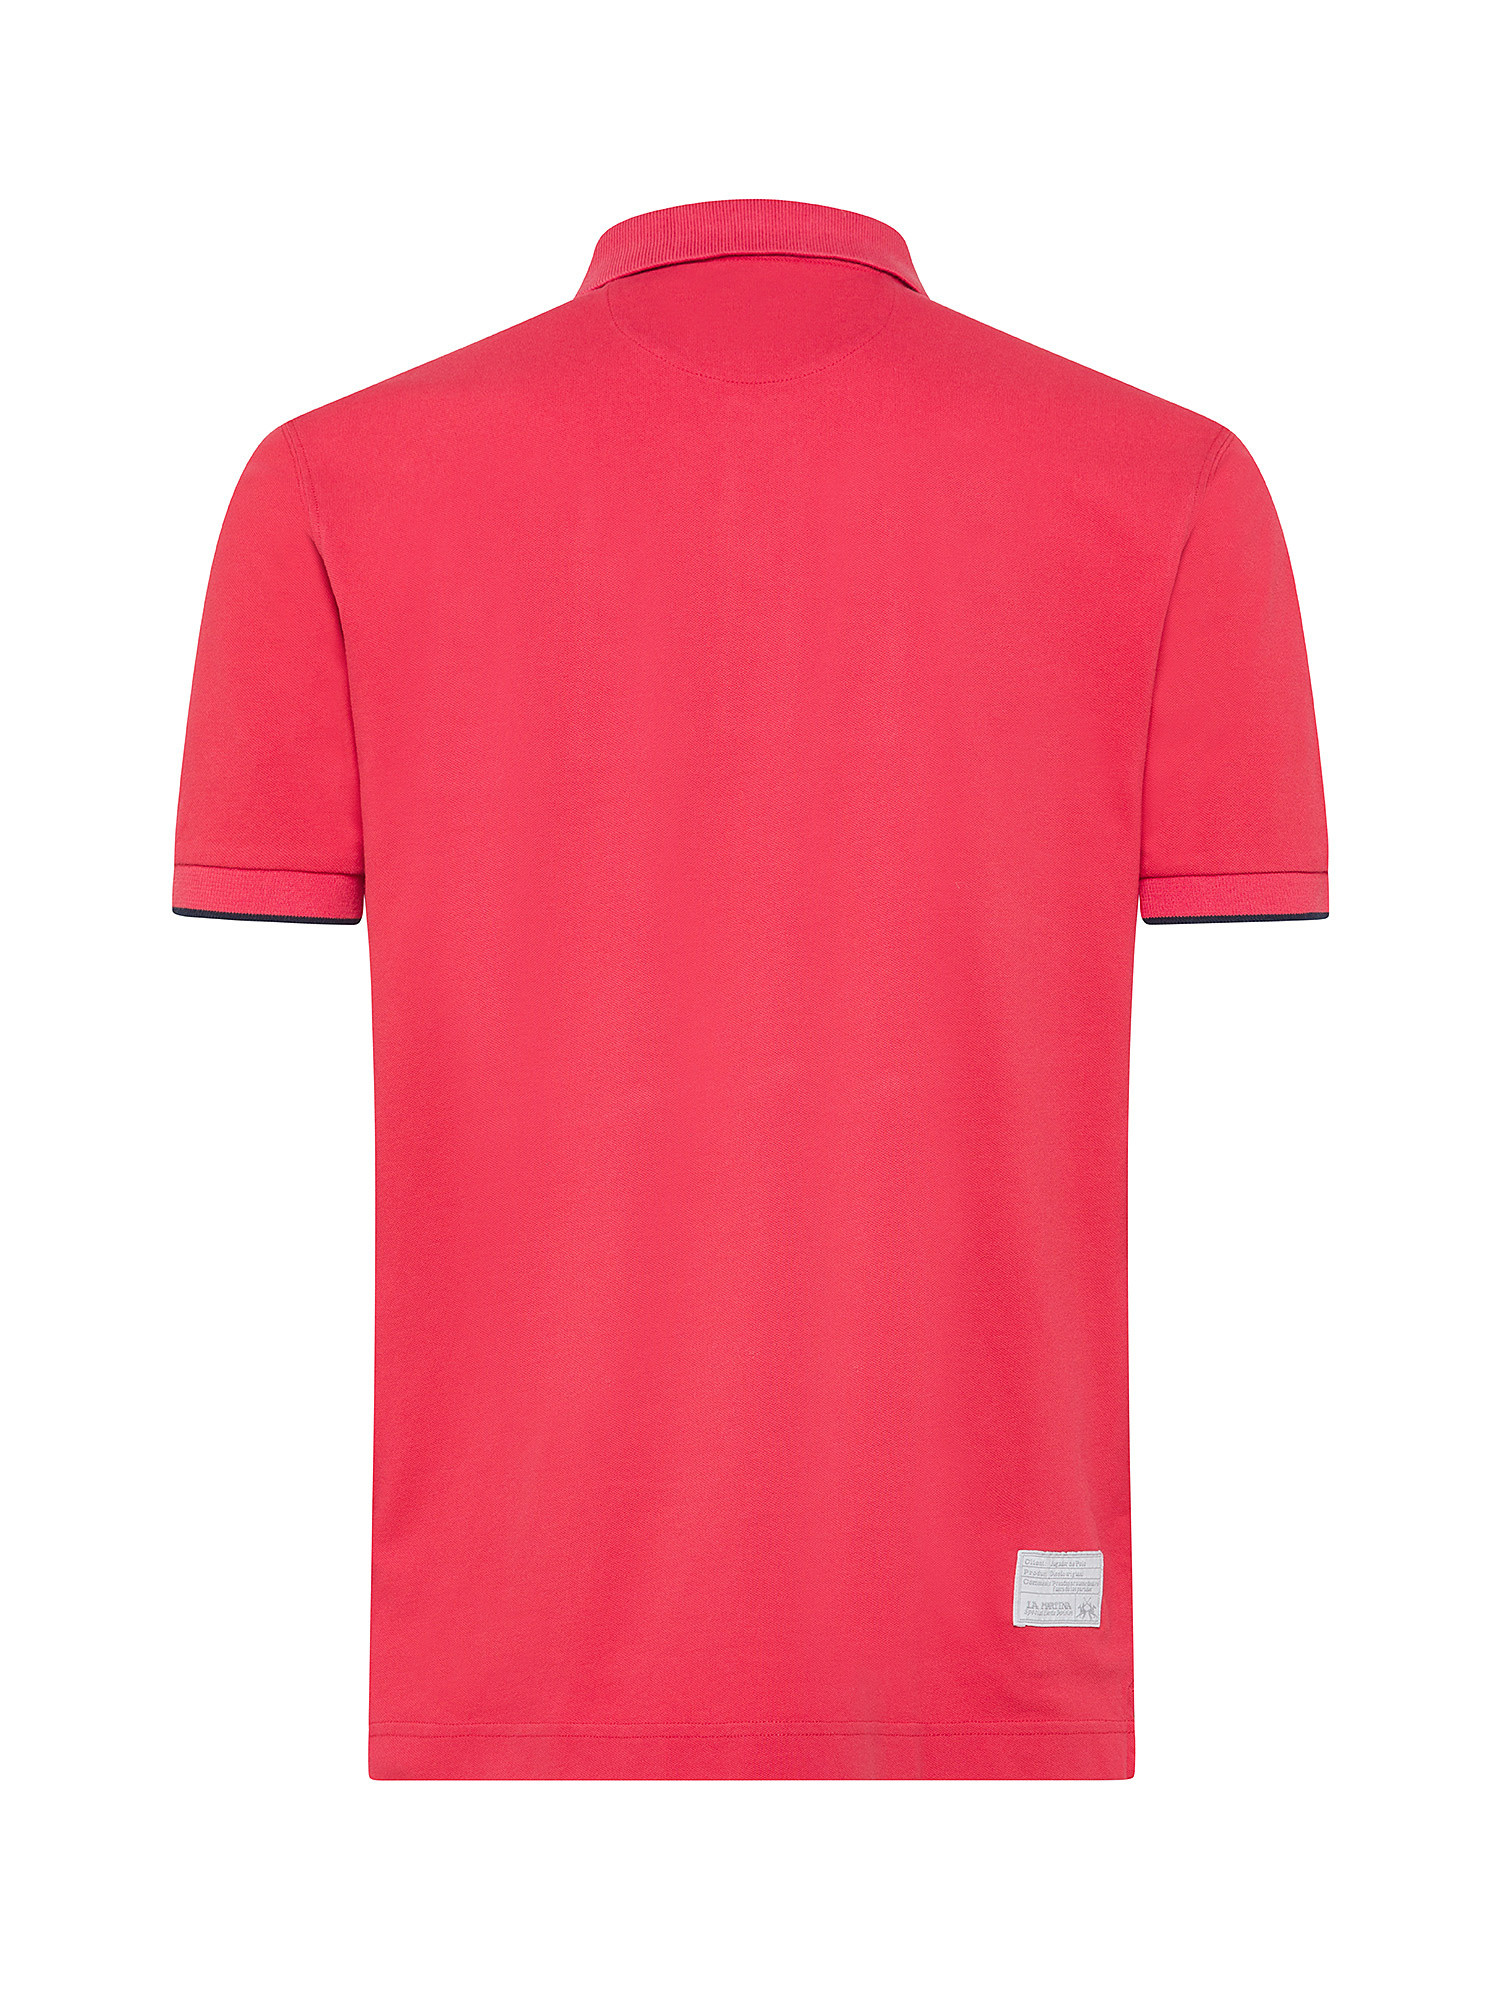 La Martina - Short-sleeved polo shirt in stretch piqué, Red, large image number 1